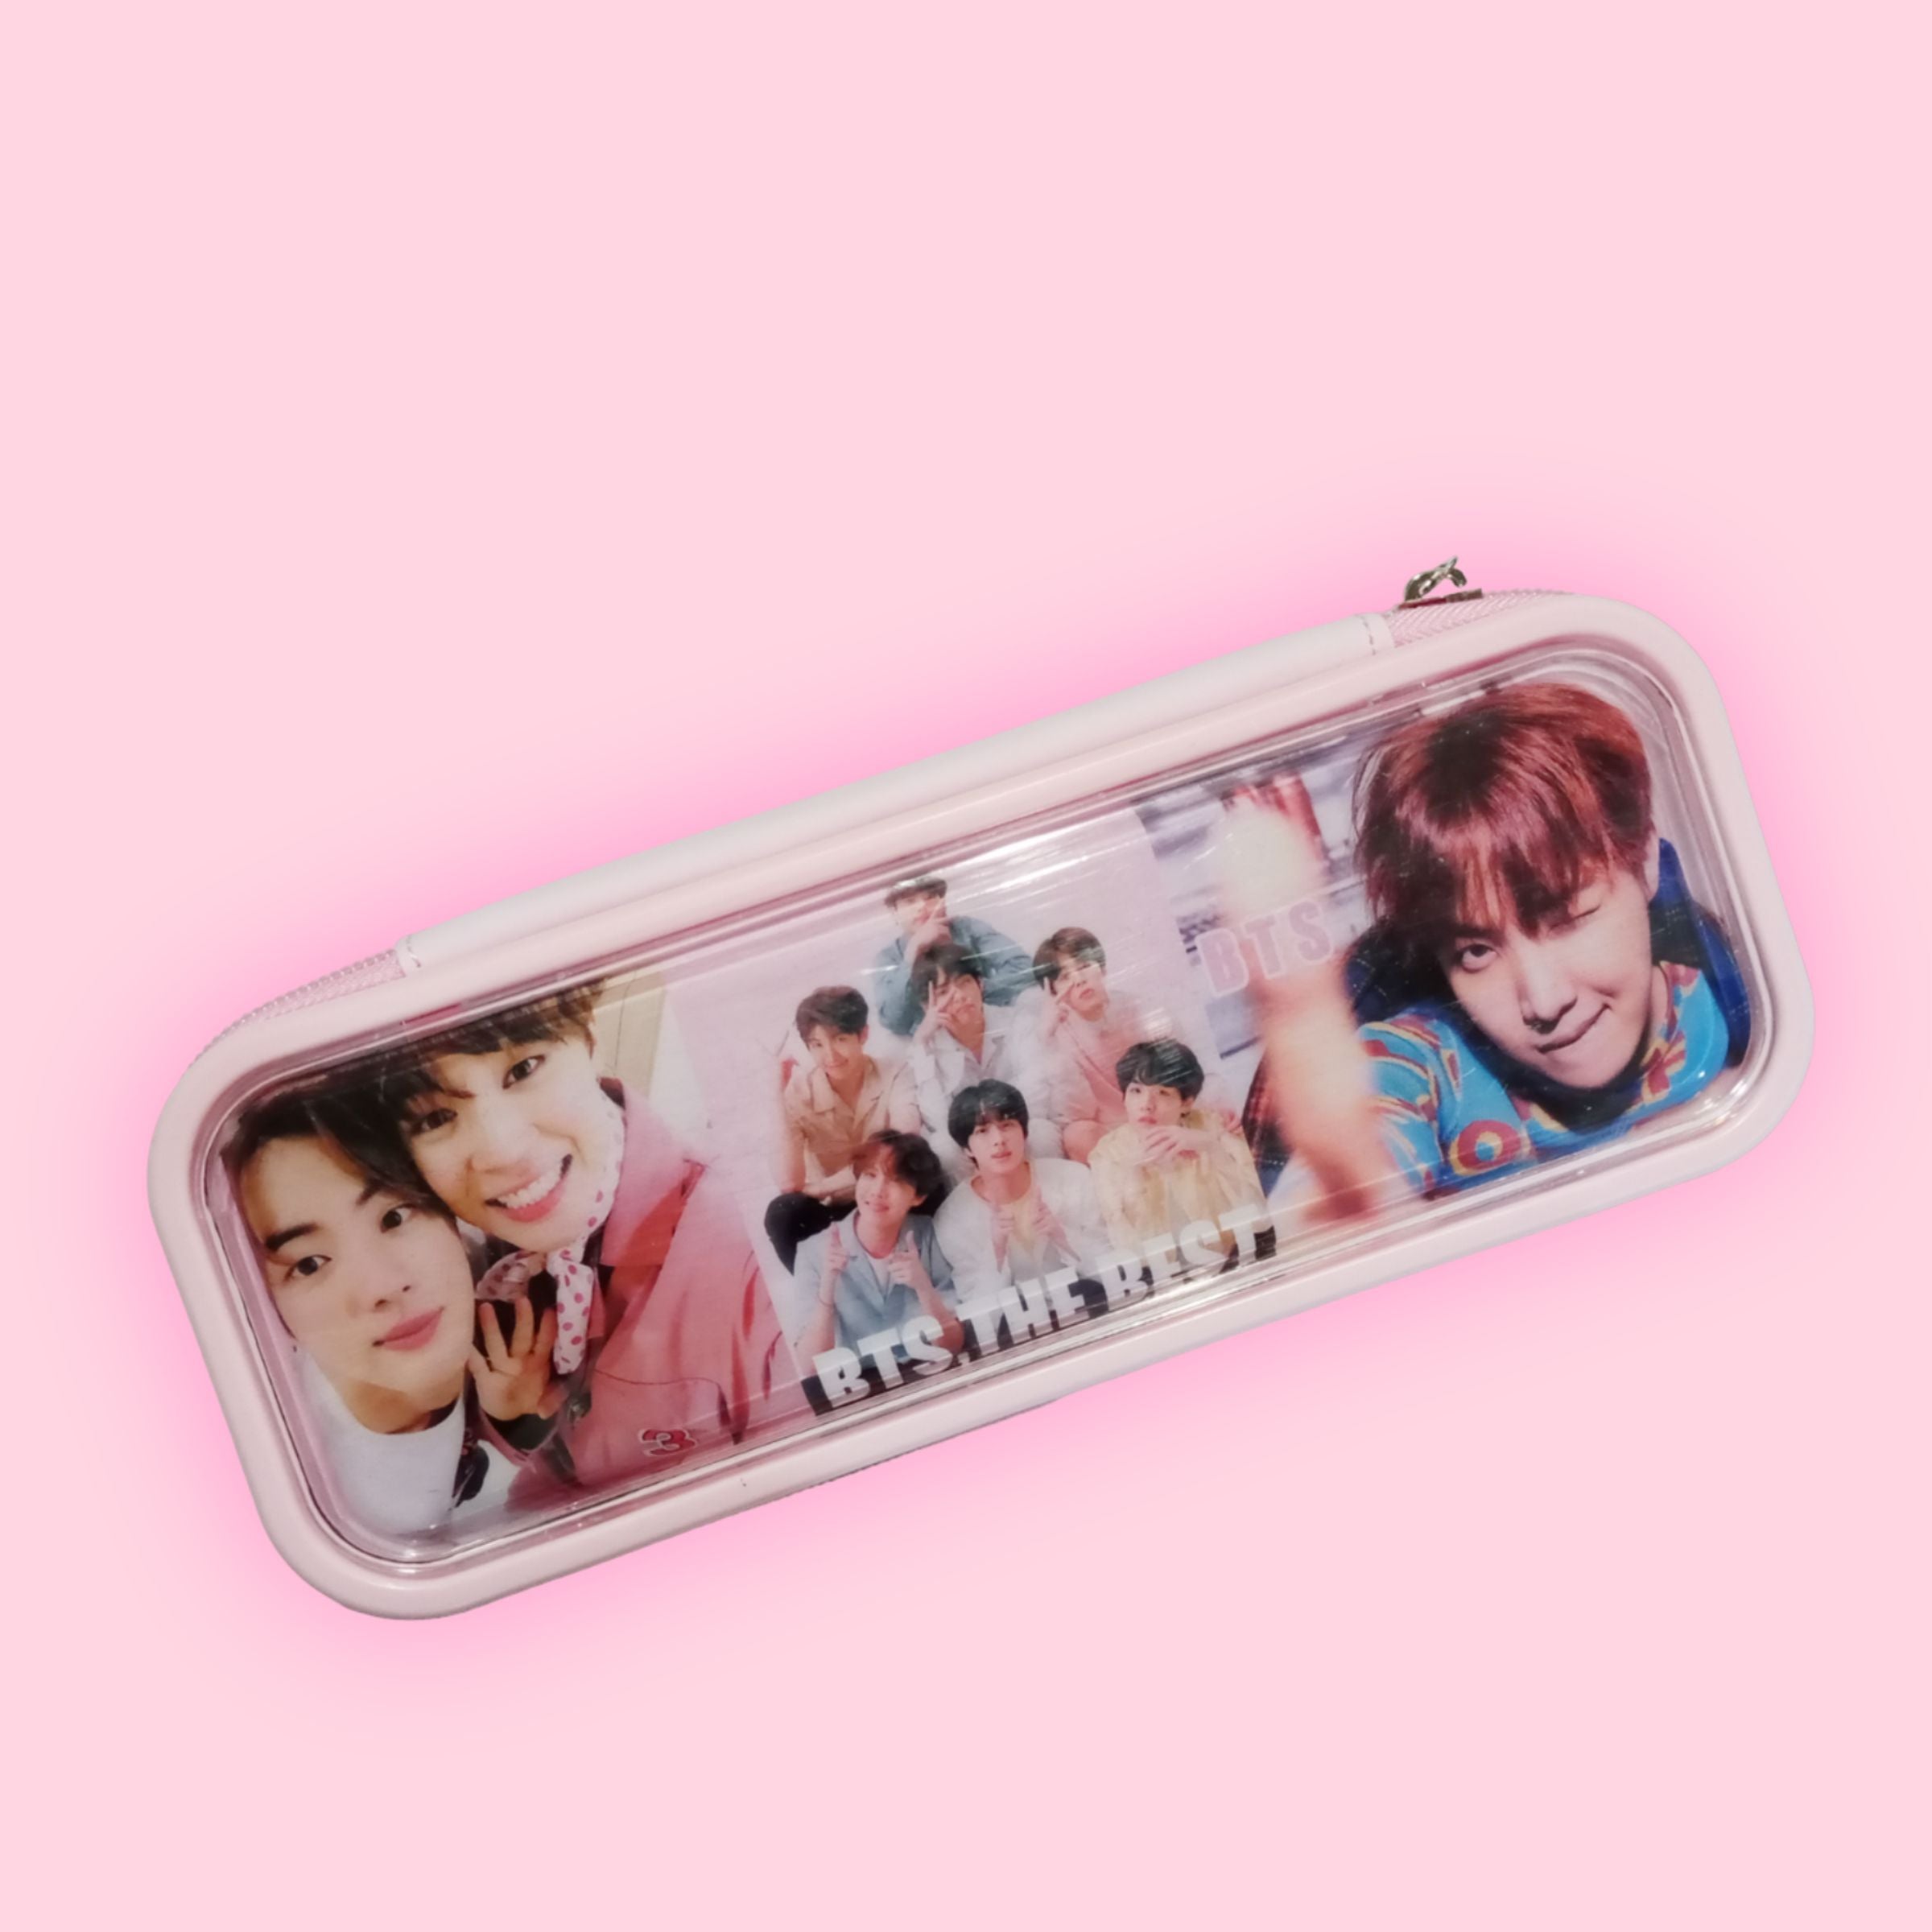 BTS Pink Pencil Pouch With Colorful LED Lights